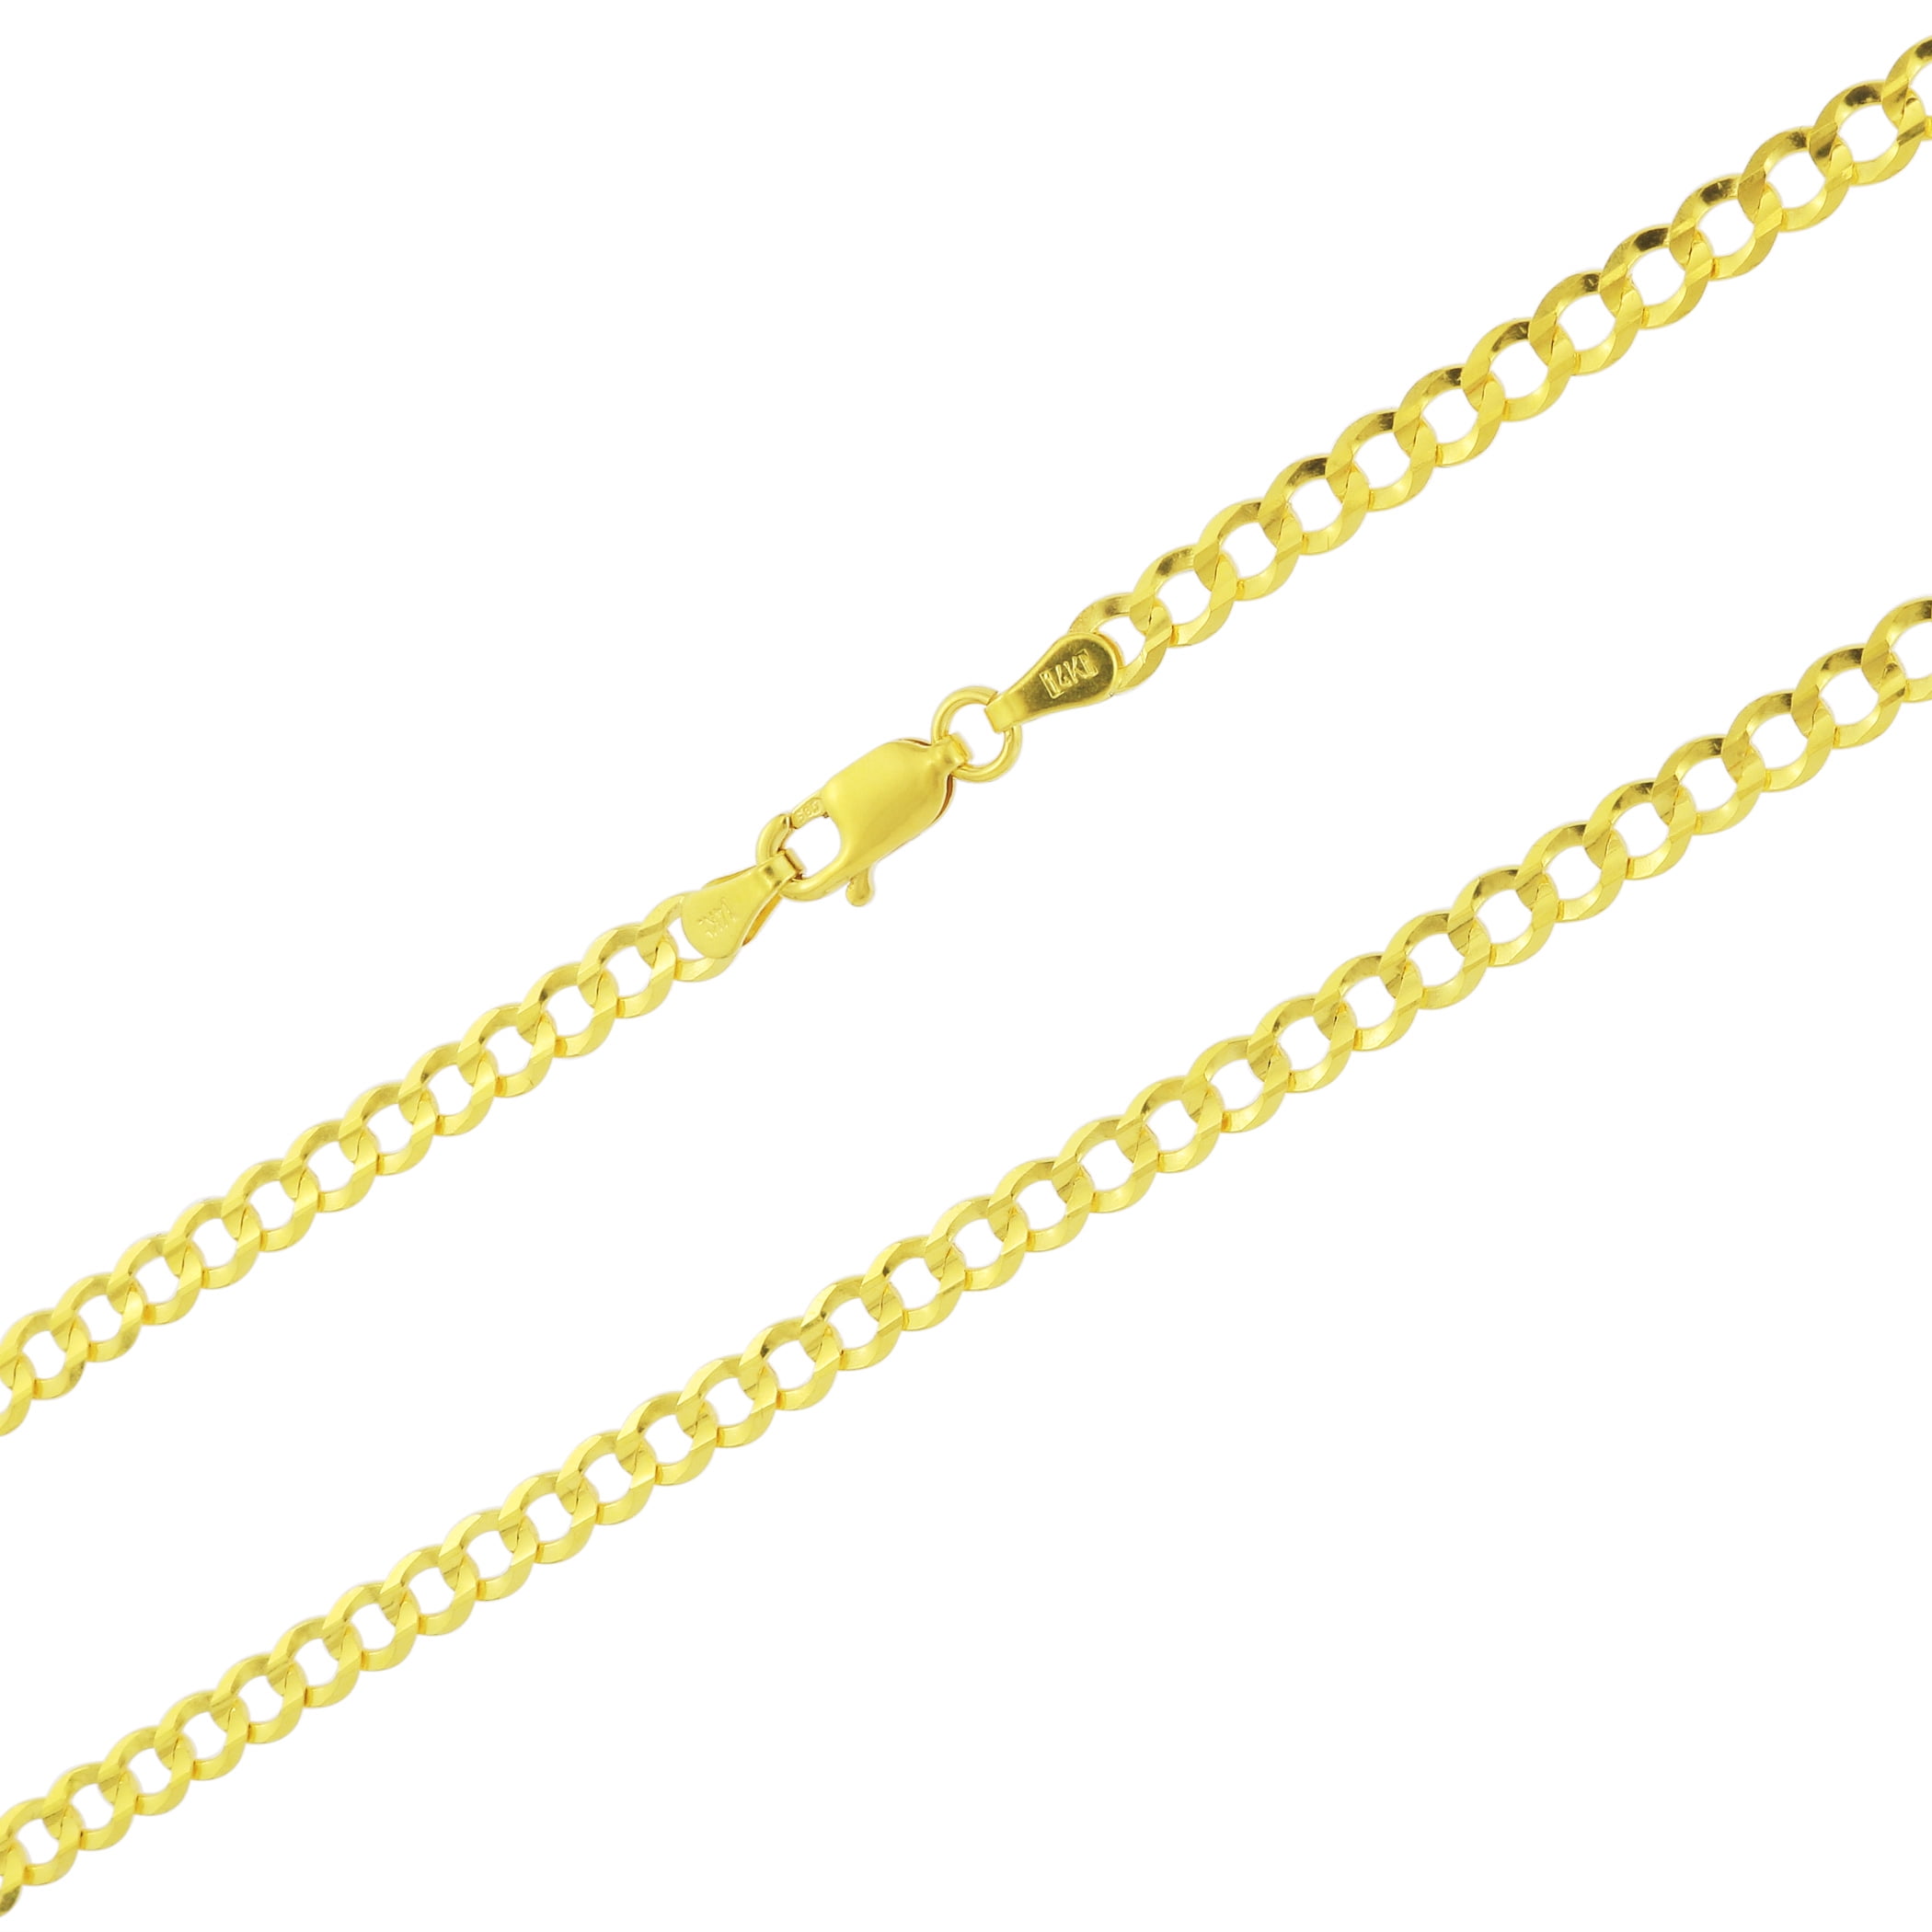 Nuragold 14k Yellow Gold 4mm Solid Cuban Curb Link Chain Pendant 